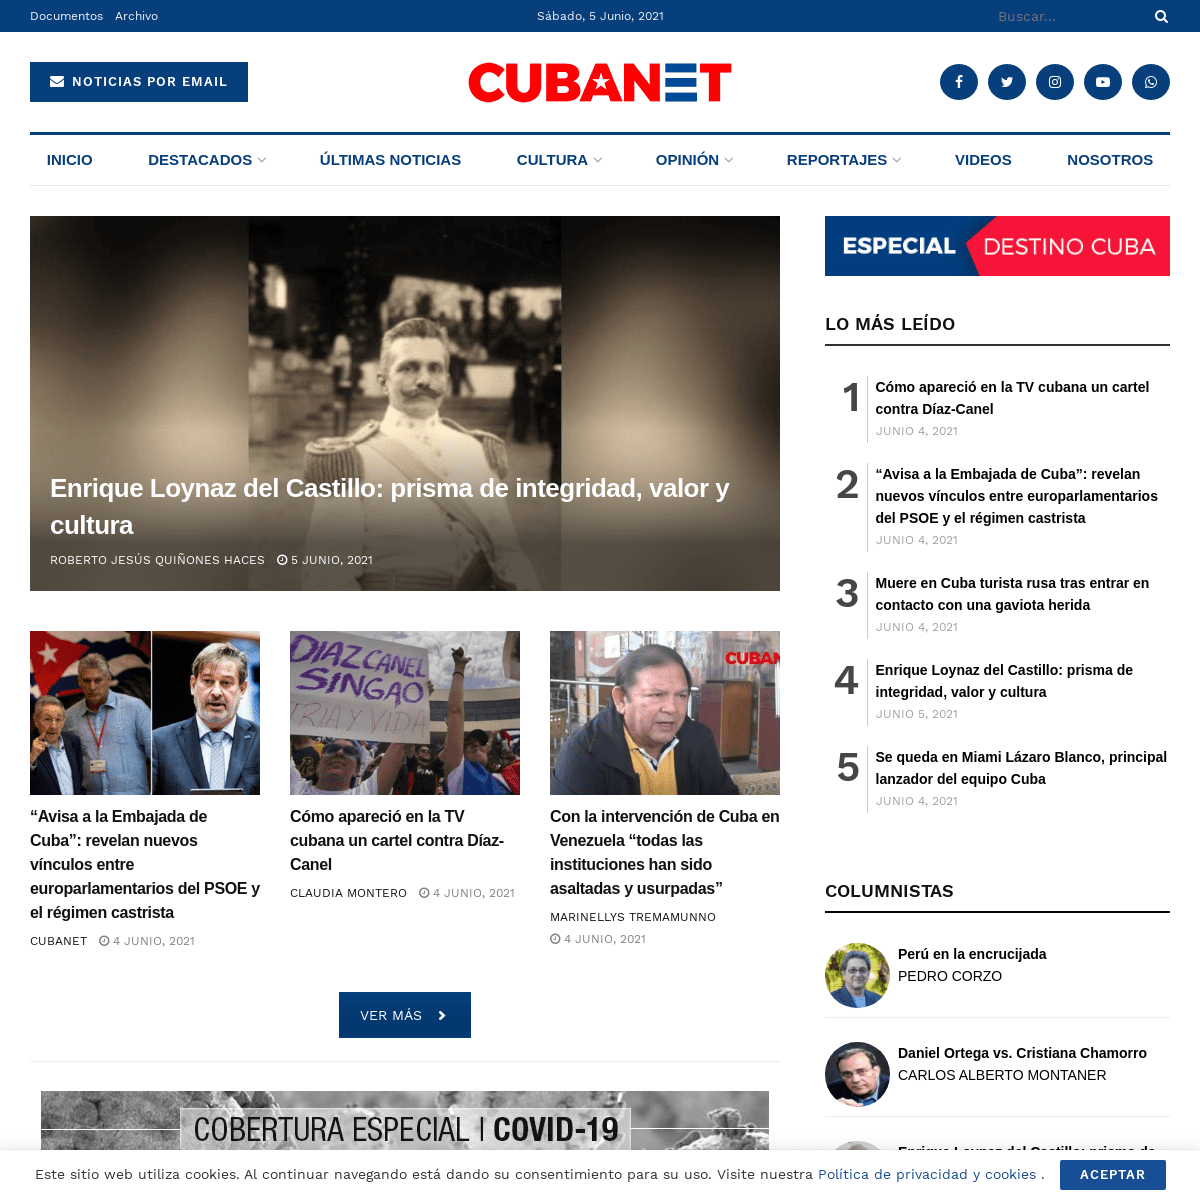 A complete backup of https://cubanet.org